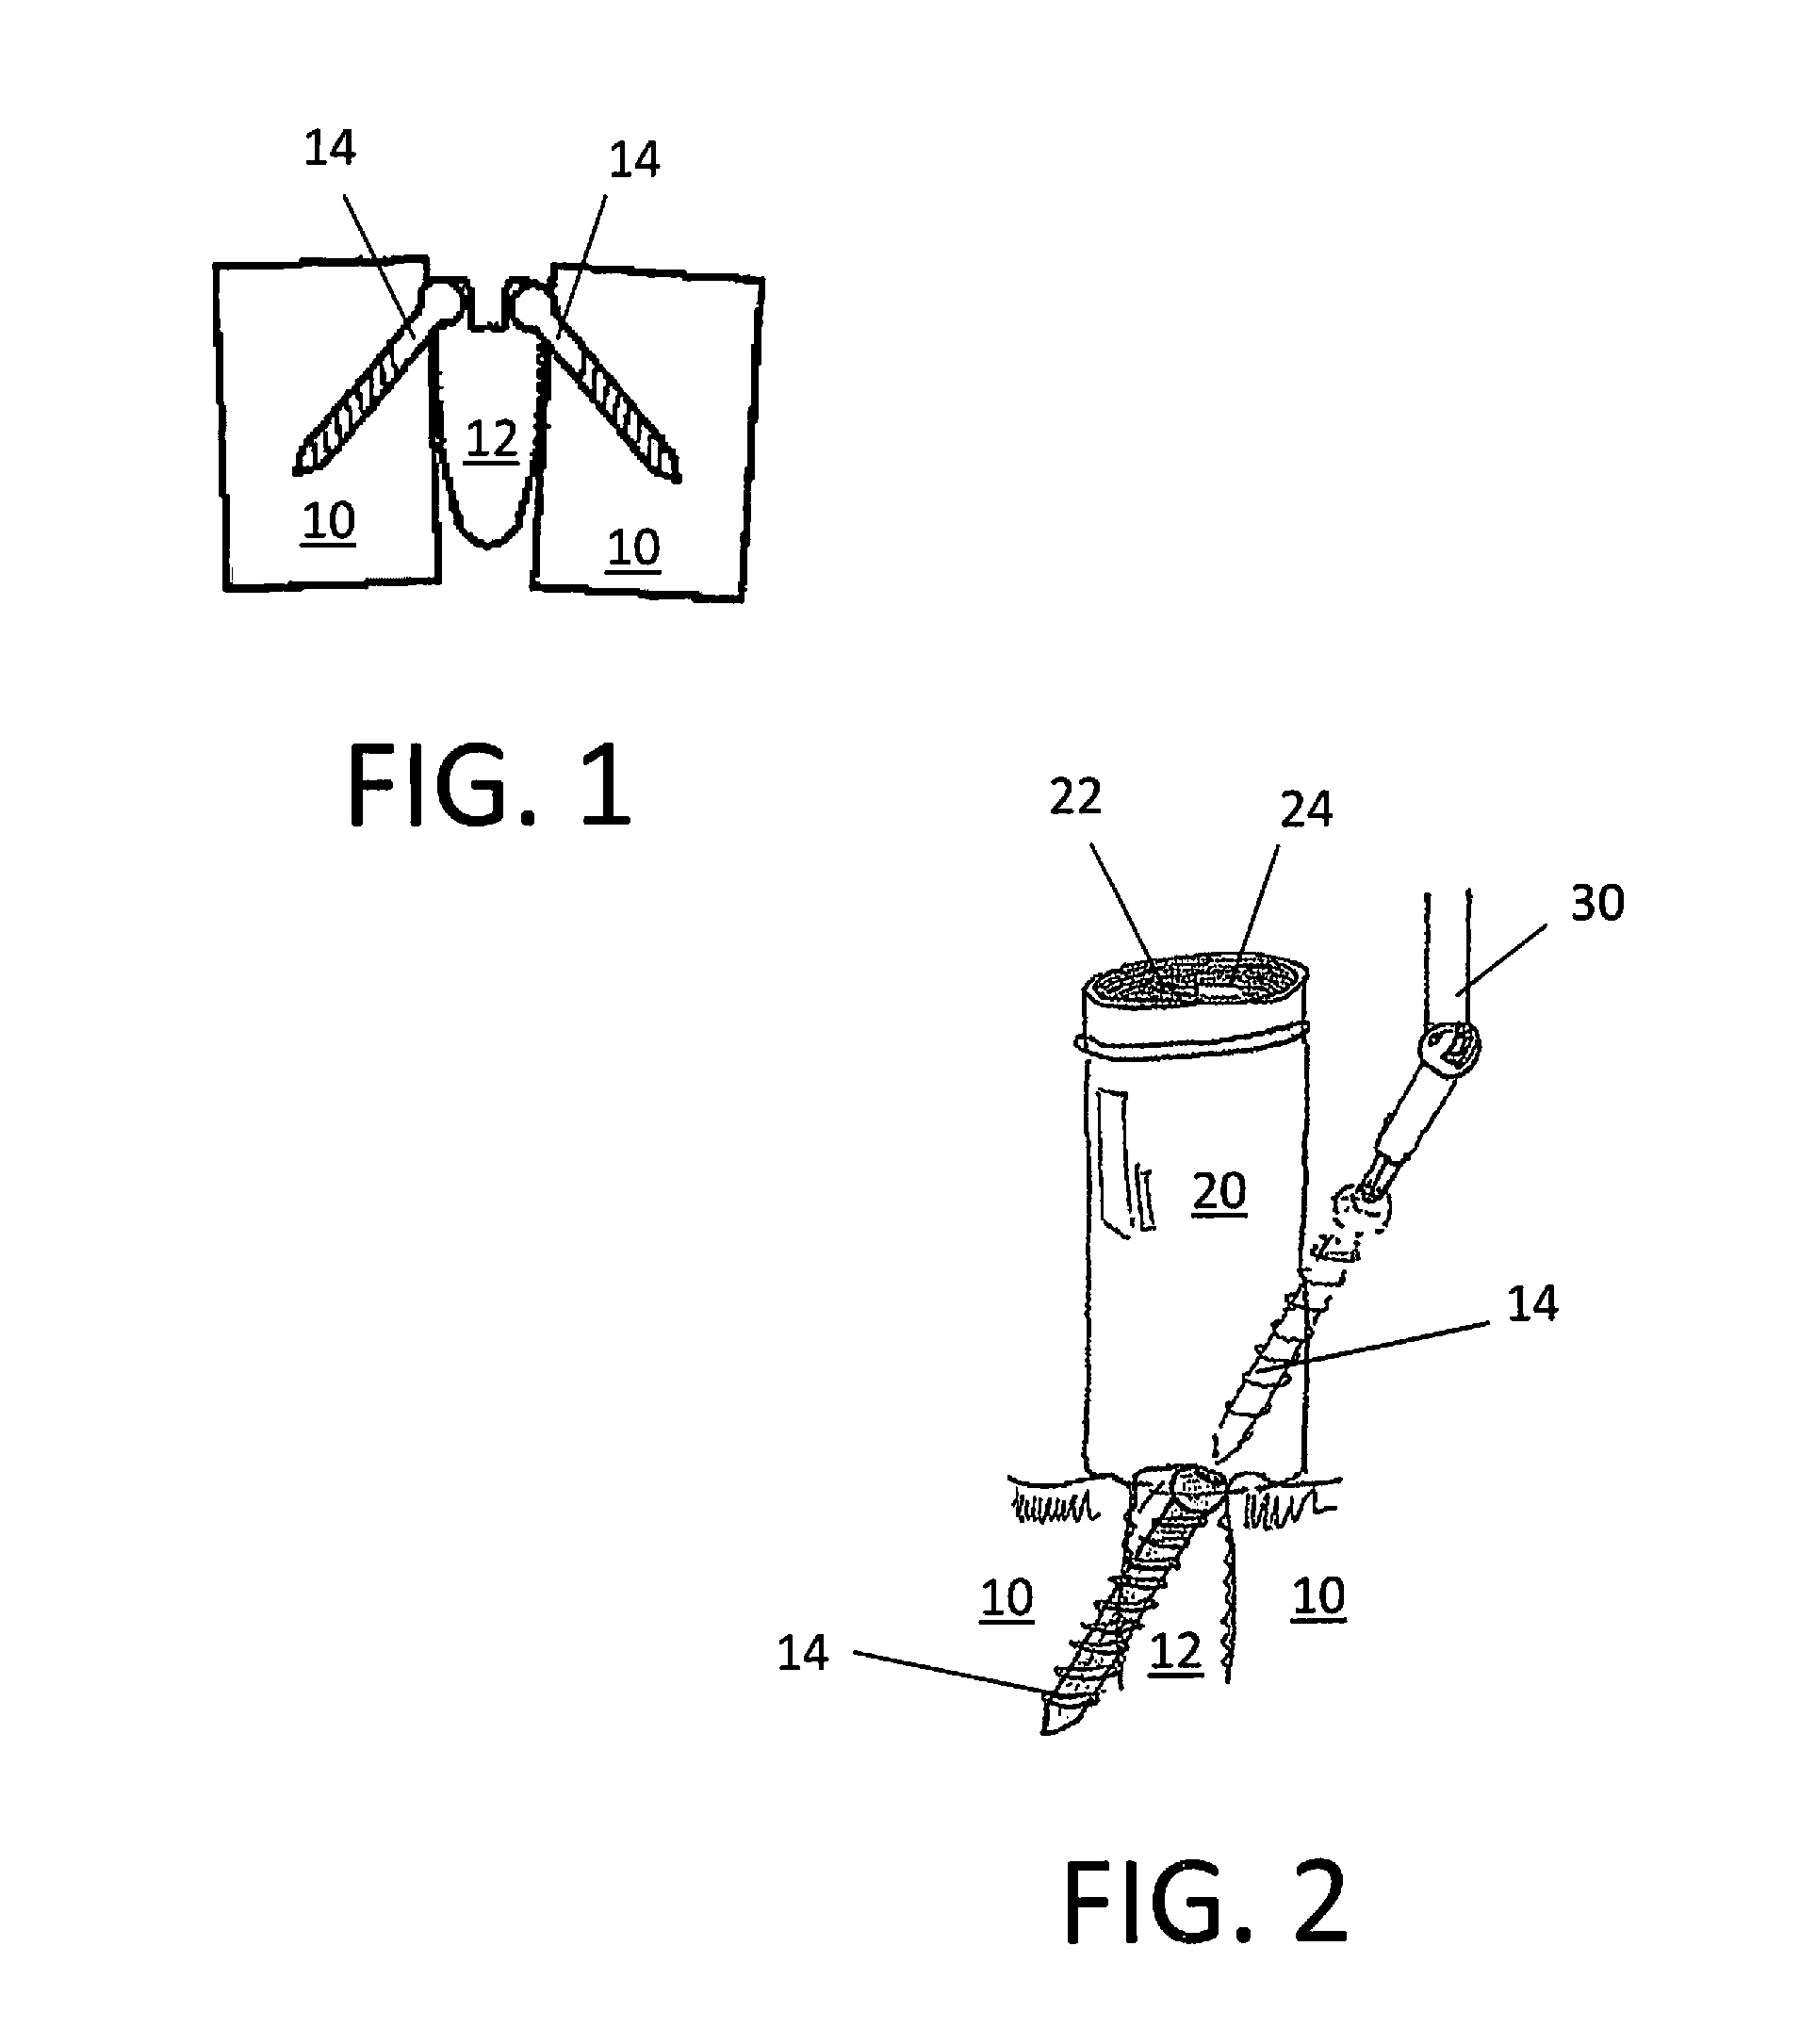 Surgical Devices for Access to Surgical Sites